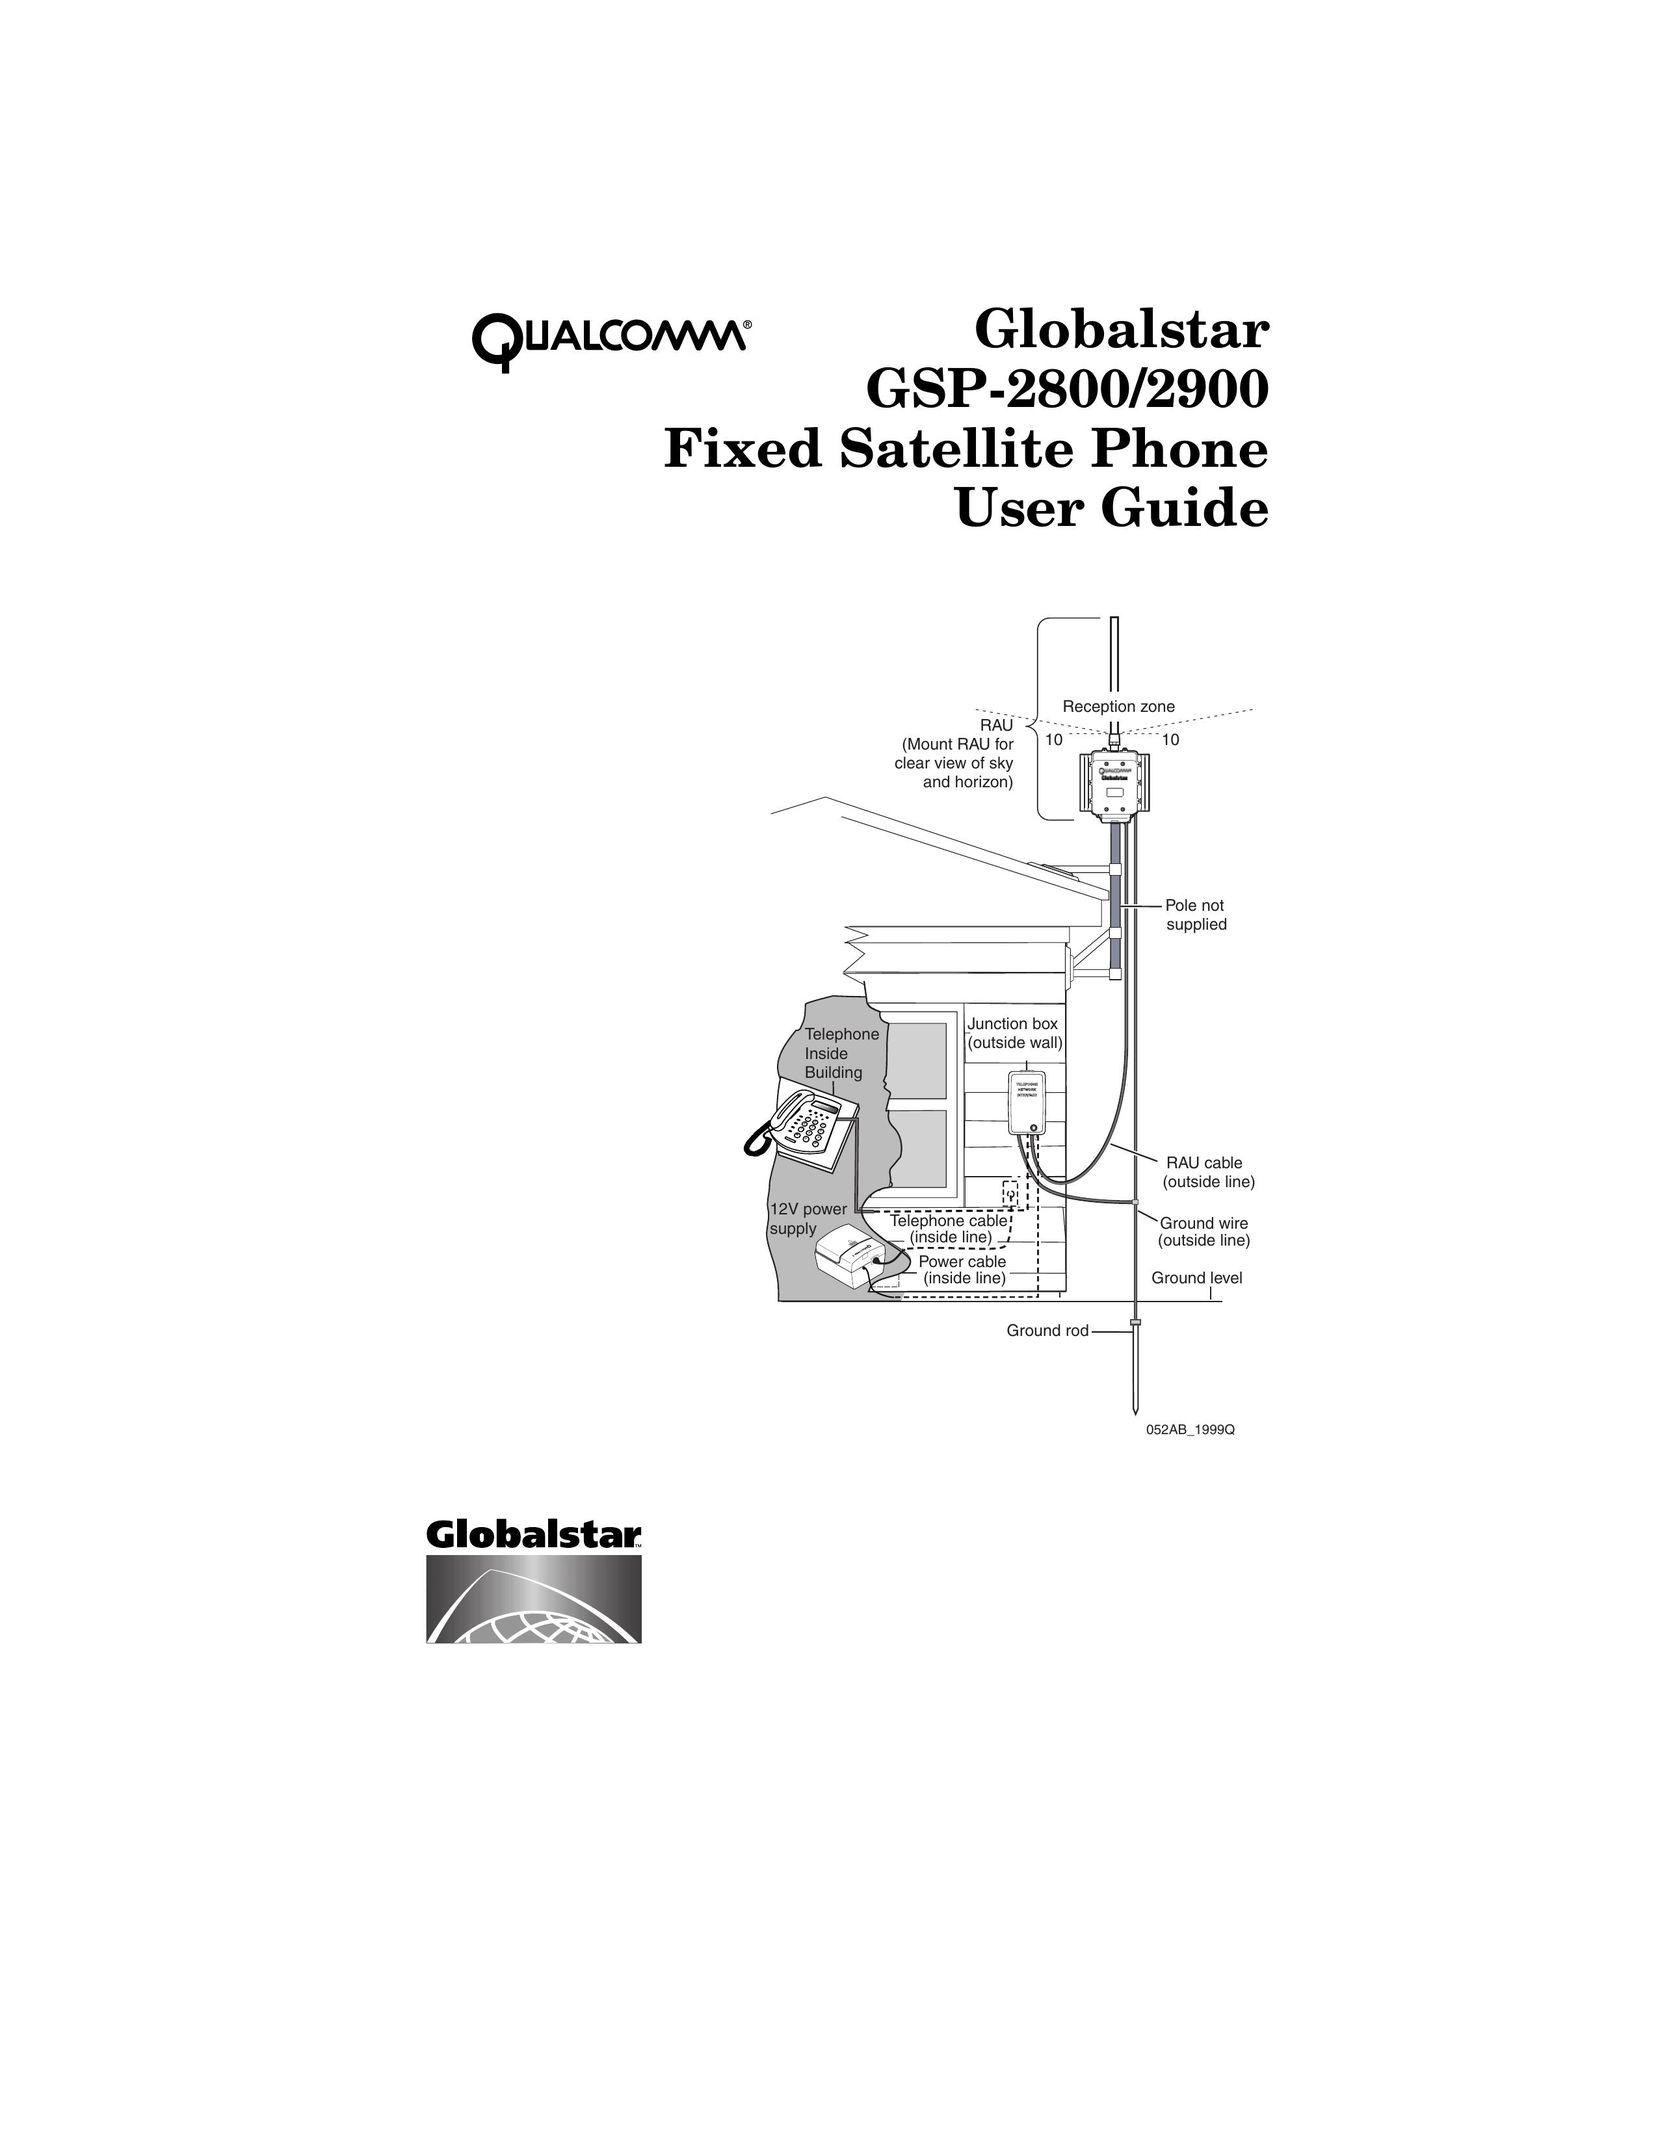 Qualcomm GSP-2800 Cell Phone User Manual